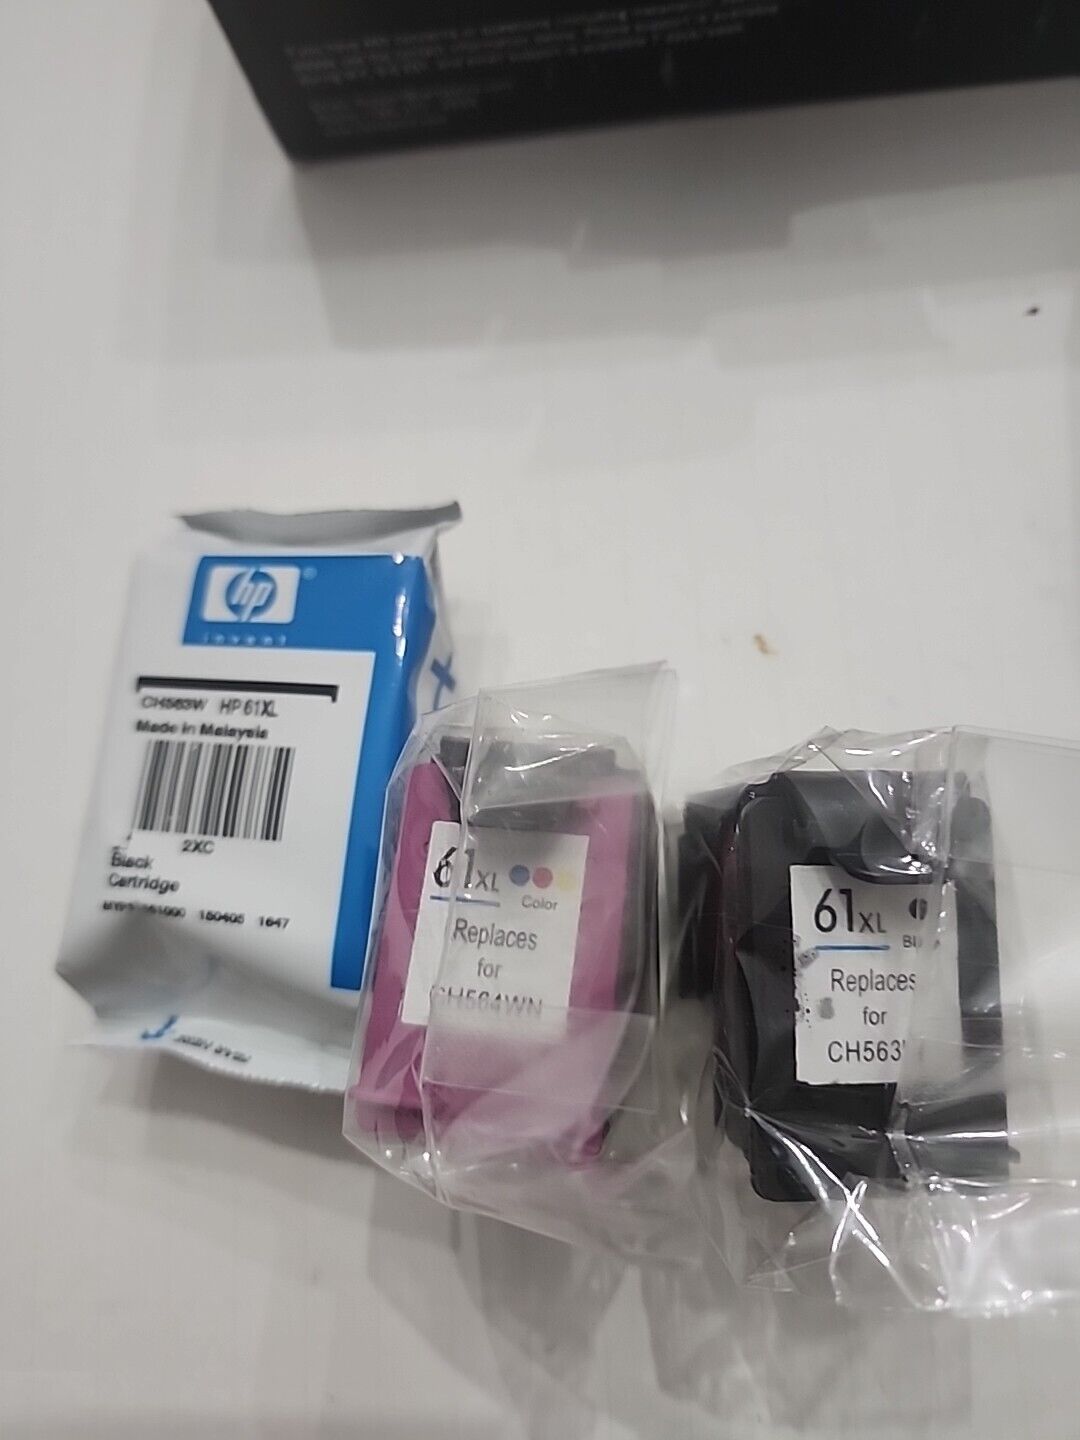 Two HP 61 Black One Tri-color Ink Cartridges - One Pack of 67/305 Tri Colored